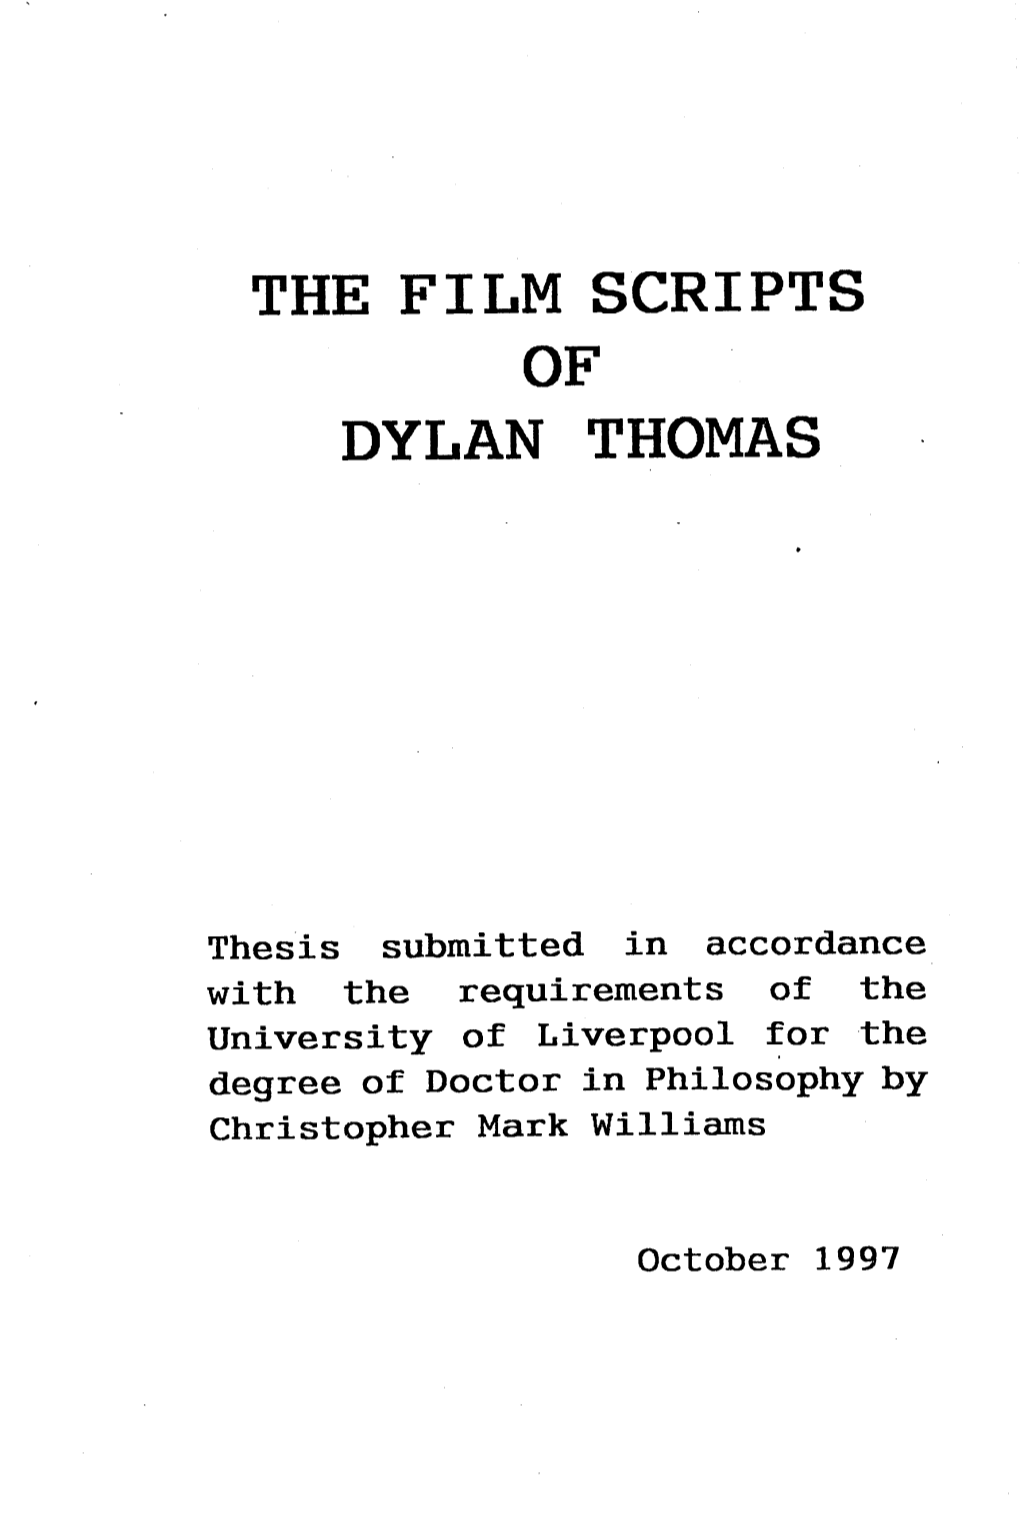 The Film Scripts of Dylan Thomas